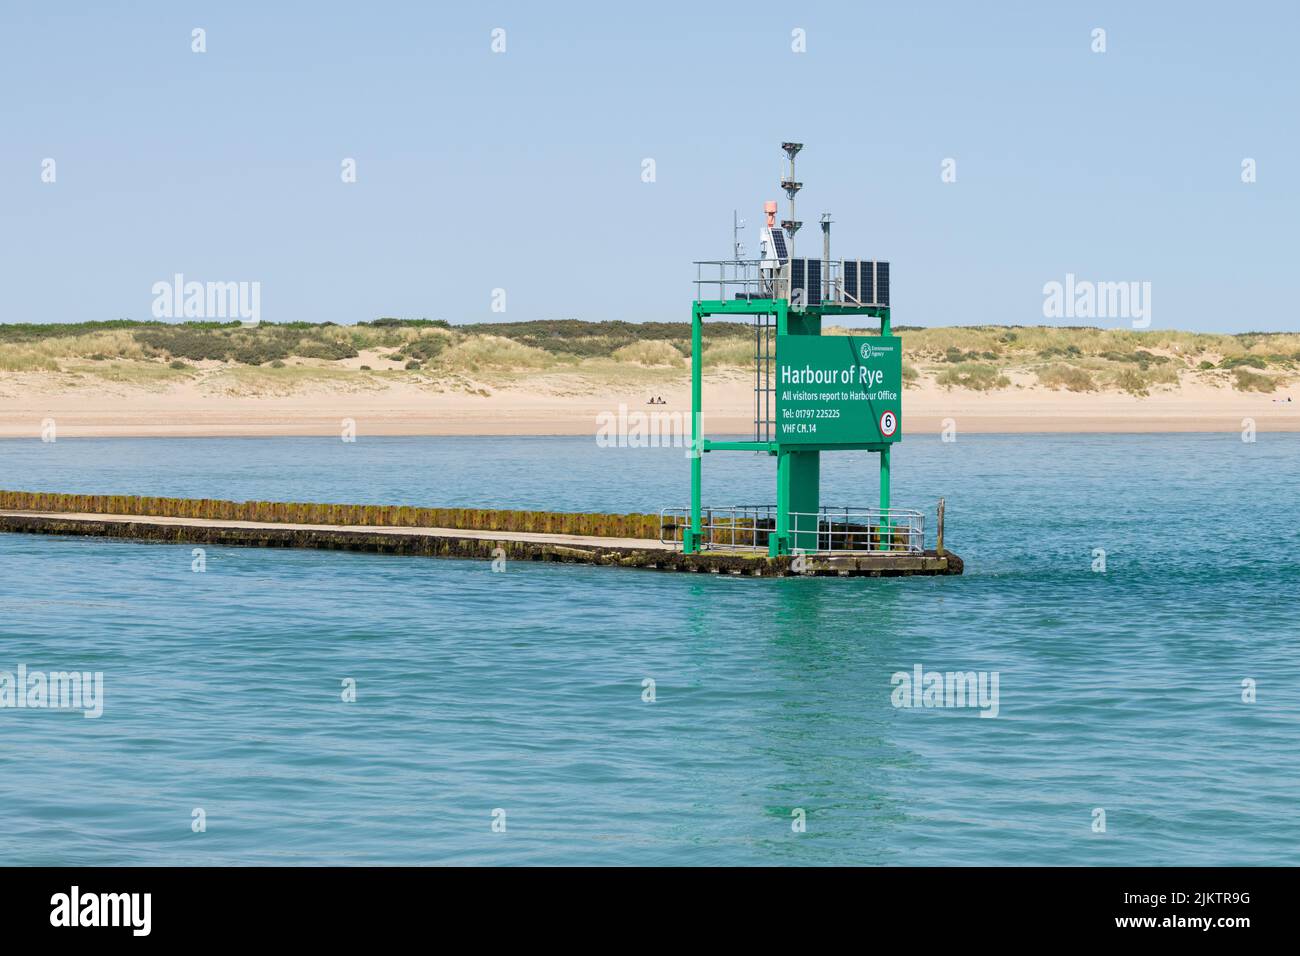 Rye Harbour Entrance sign, Rye Harbour, East Sussex, England, UK Stock Photo